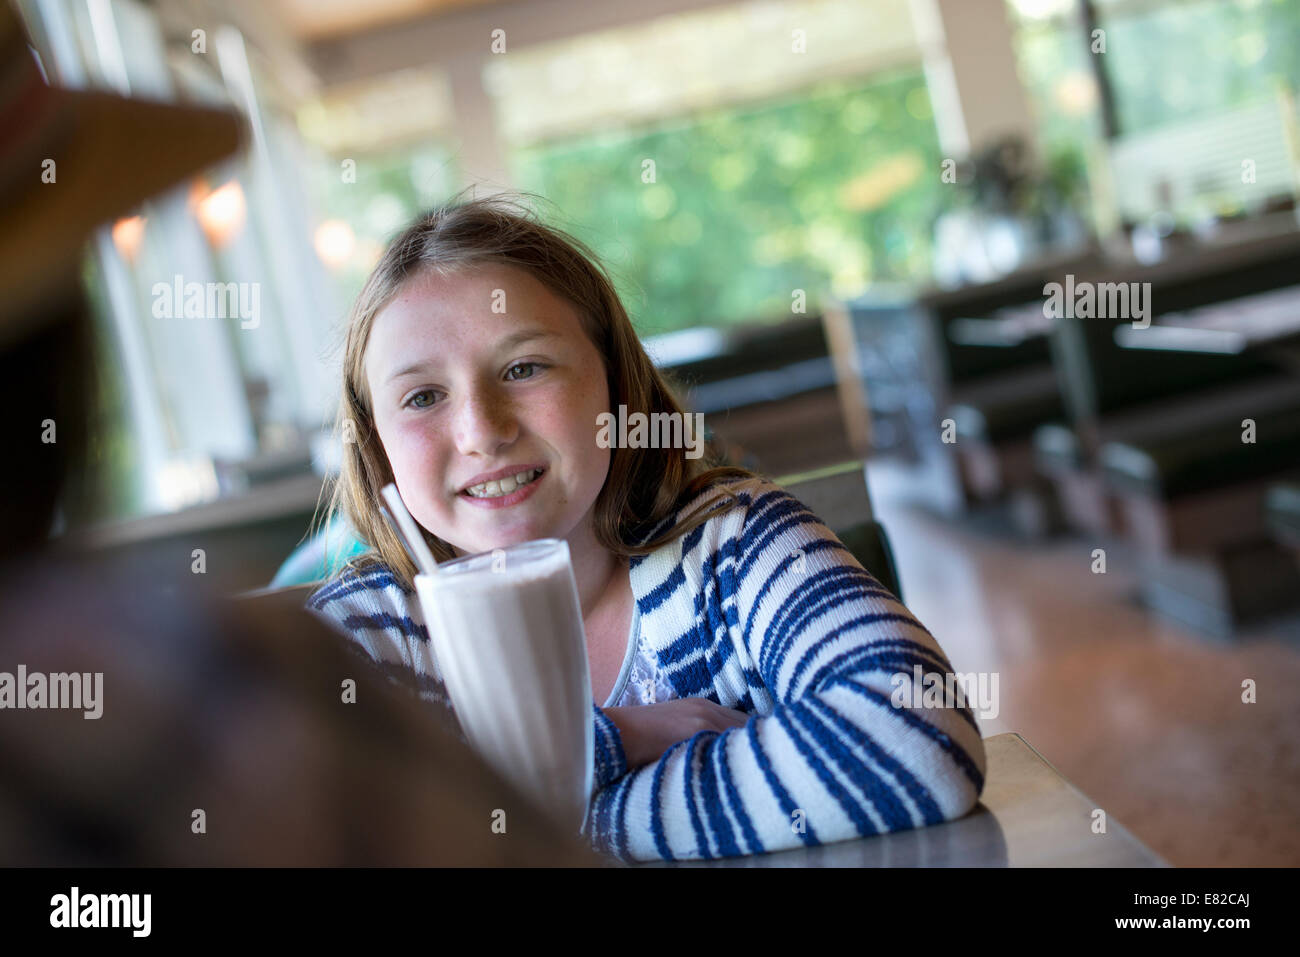 A young girl with a large milk shake at a diner table. Stock Photo